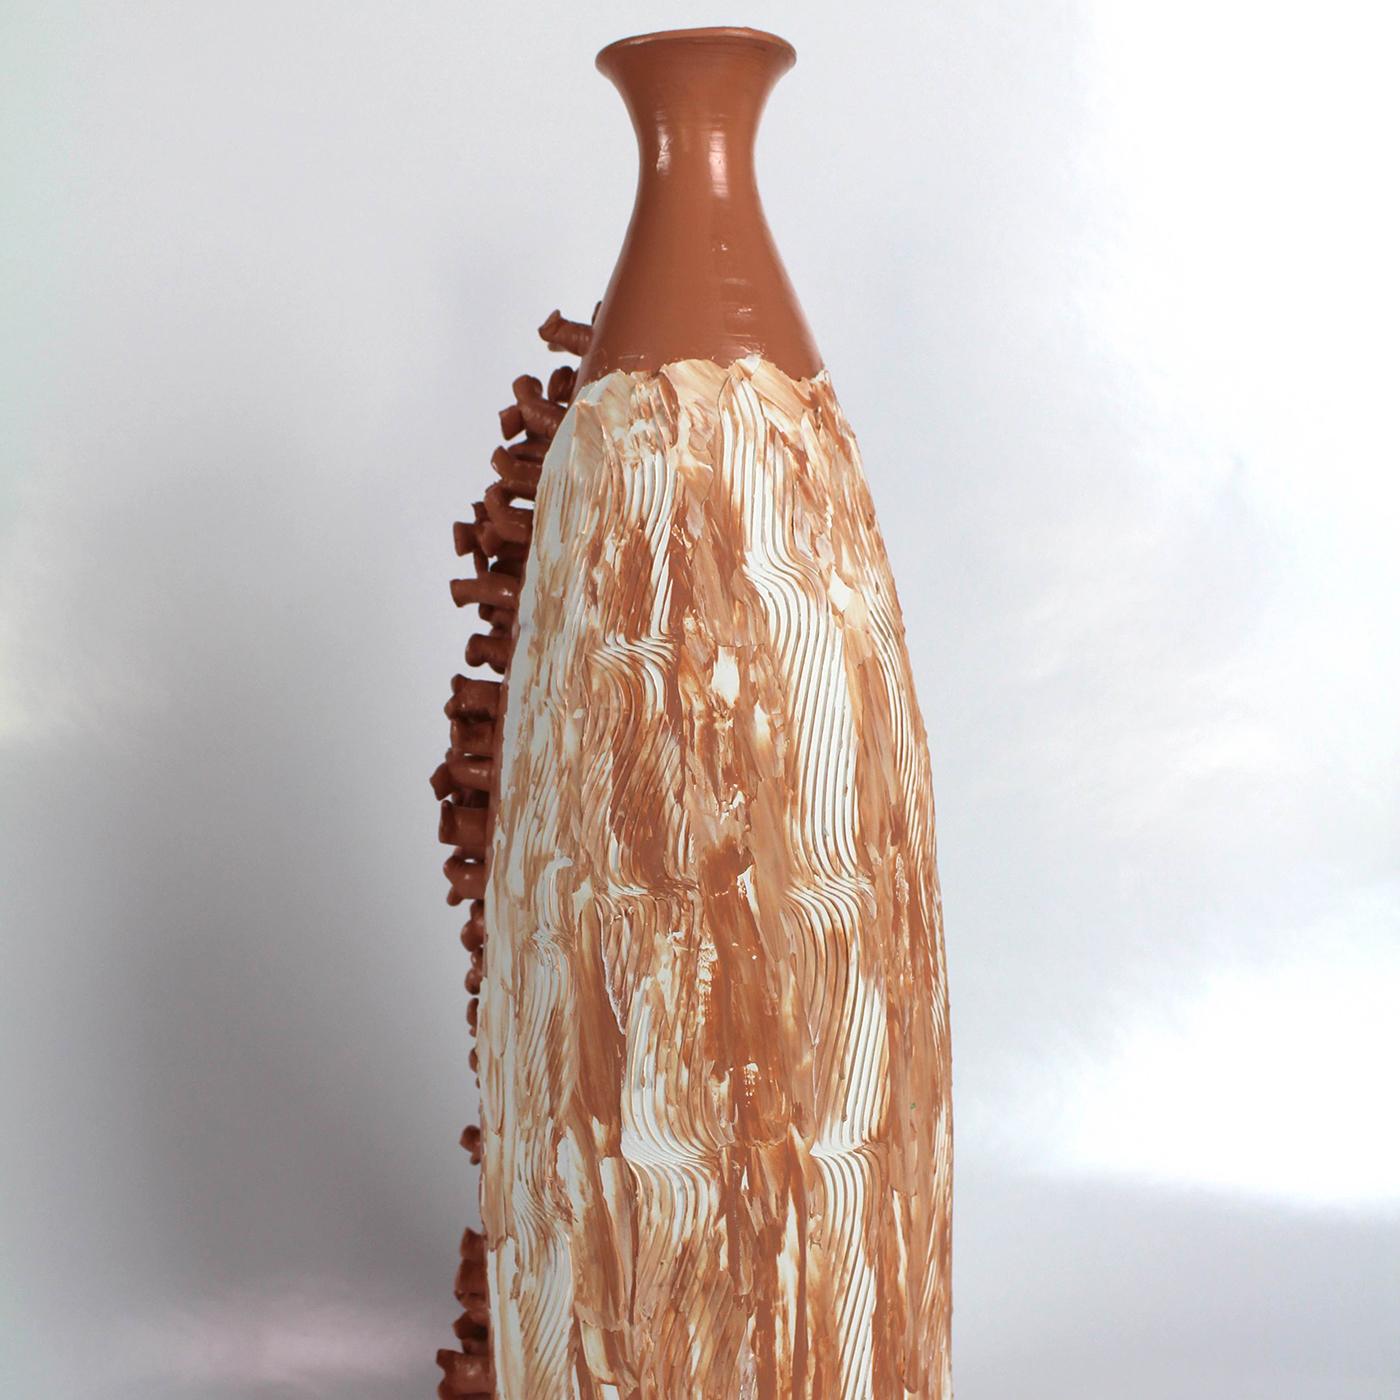 This beautiful vase by designer Mascia Meccani is crafted from red terracotta. Its slender silhouette with tapered neck is hand-embellished, painted in a pretty pink tone and adorned with unusual textured detailing. Exuding a wonderfully rustic